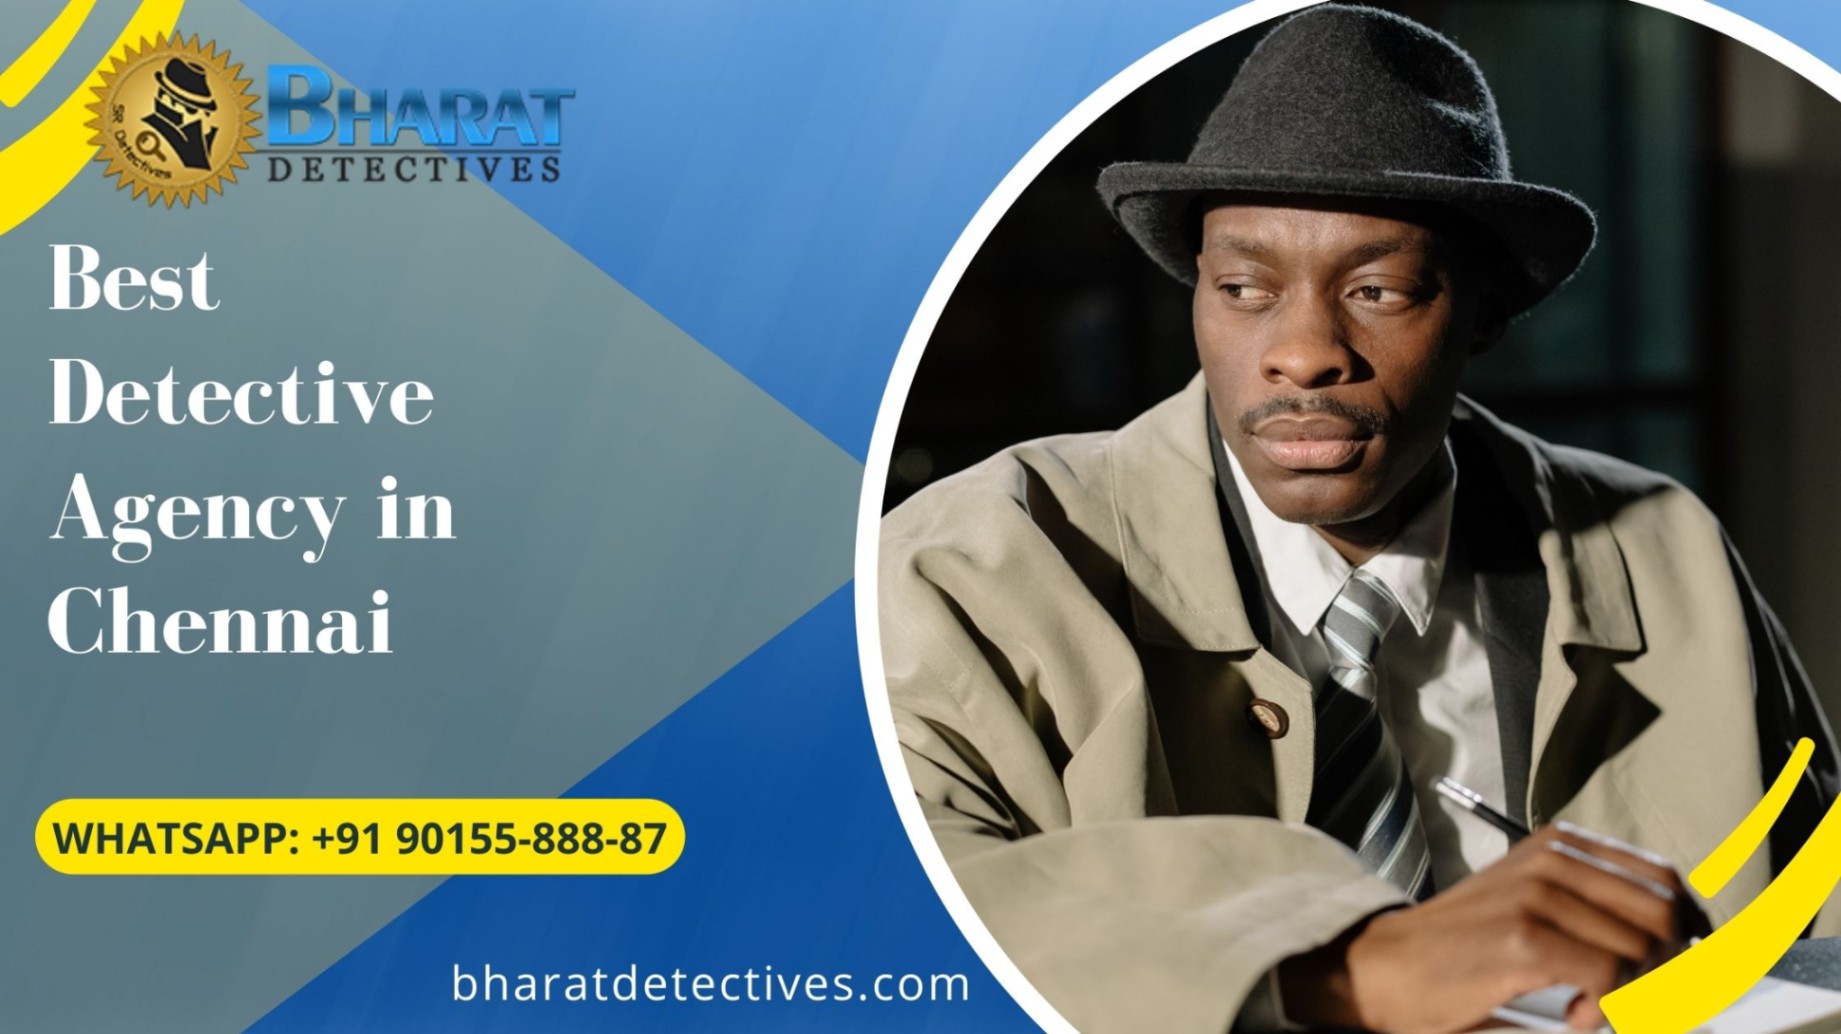 Best Detective Agency in Chennai